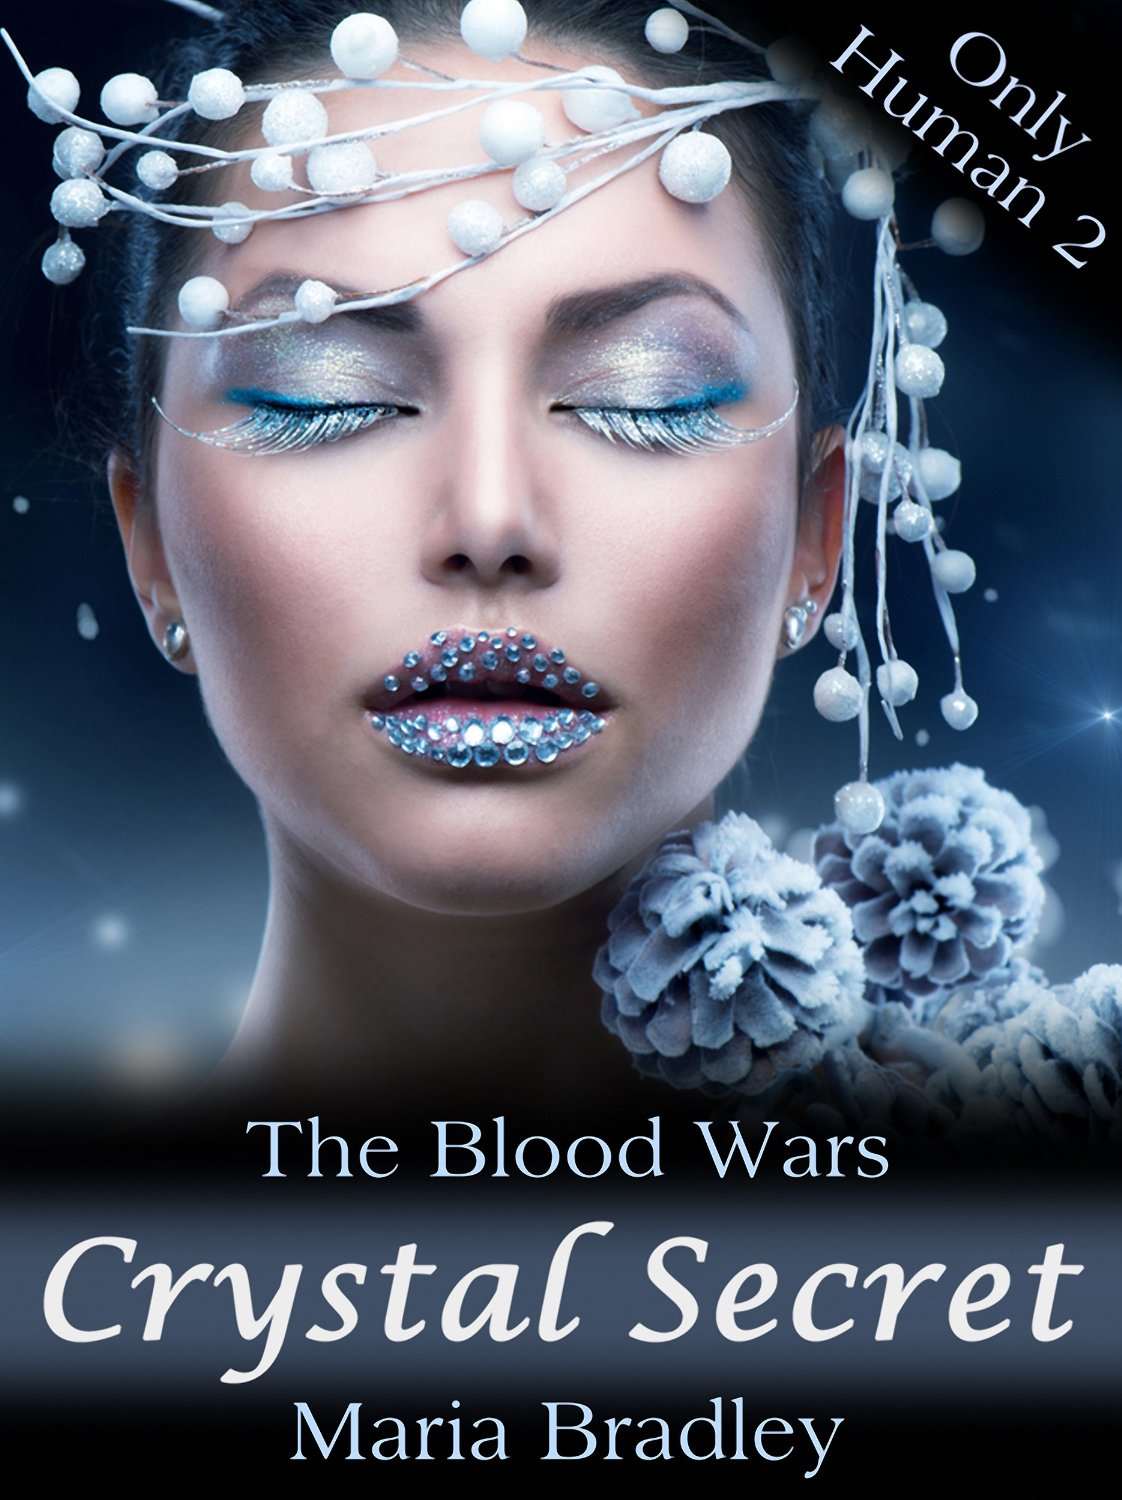 The Blood Wars – Crystal Secret (Only Human) by Maria Bradley